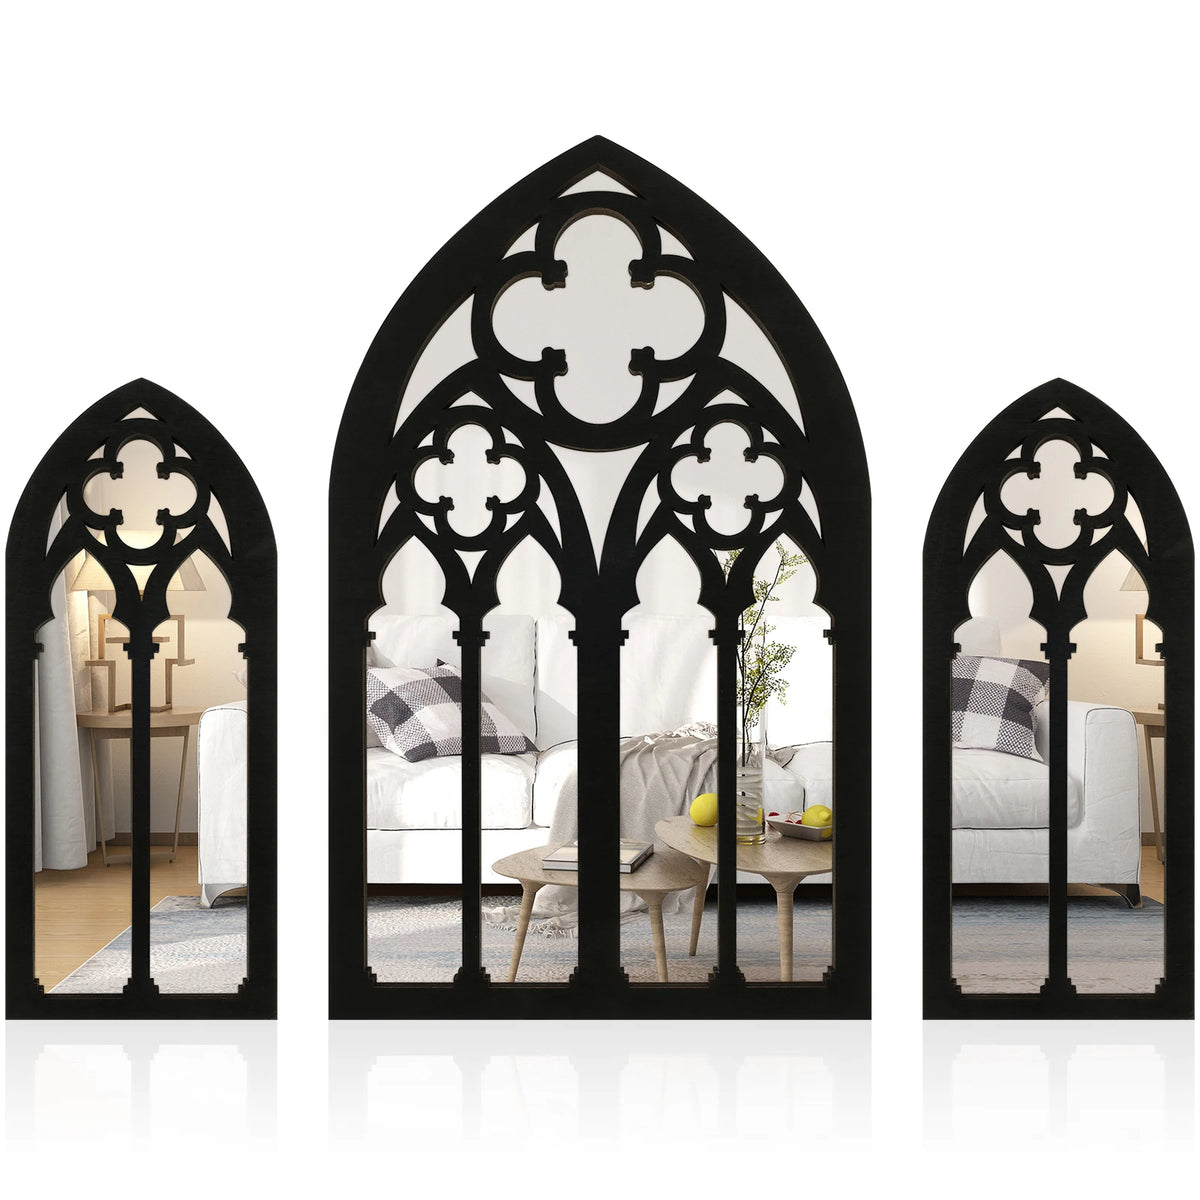 3Pcs Gothic Mirrors Wall Decor - Arched Decorative Wall Mounted Mirrors, Vintage Cathedral Indoor Window Mirror for Goth Room Decor